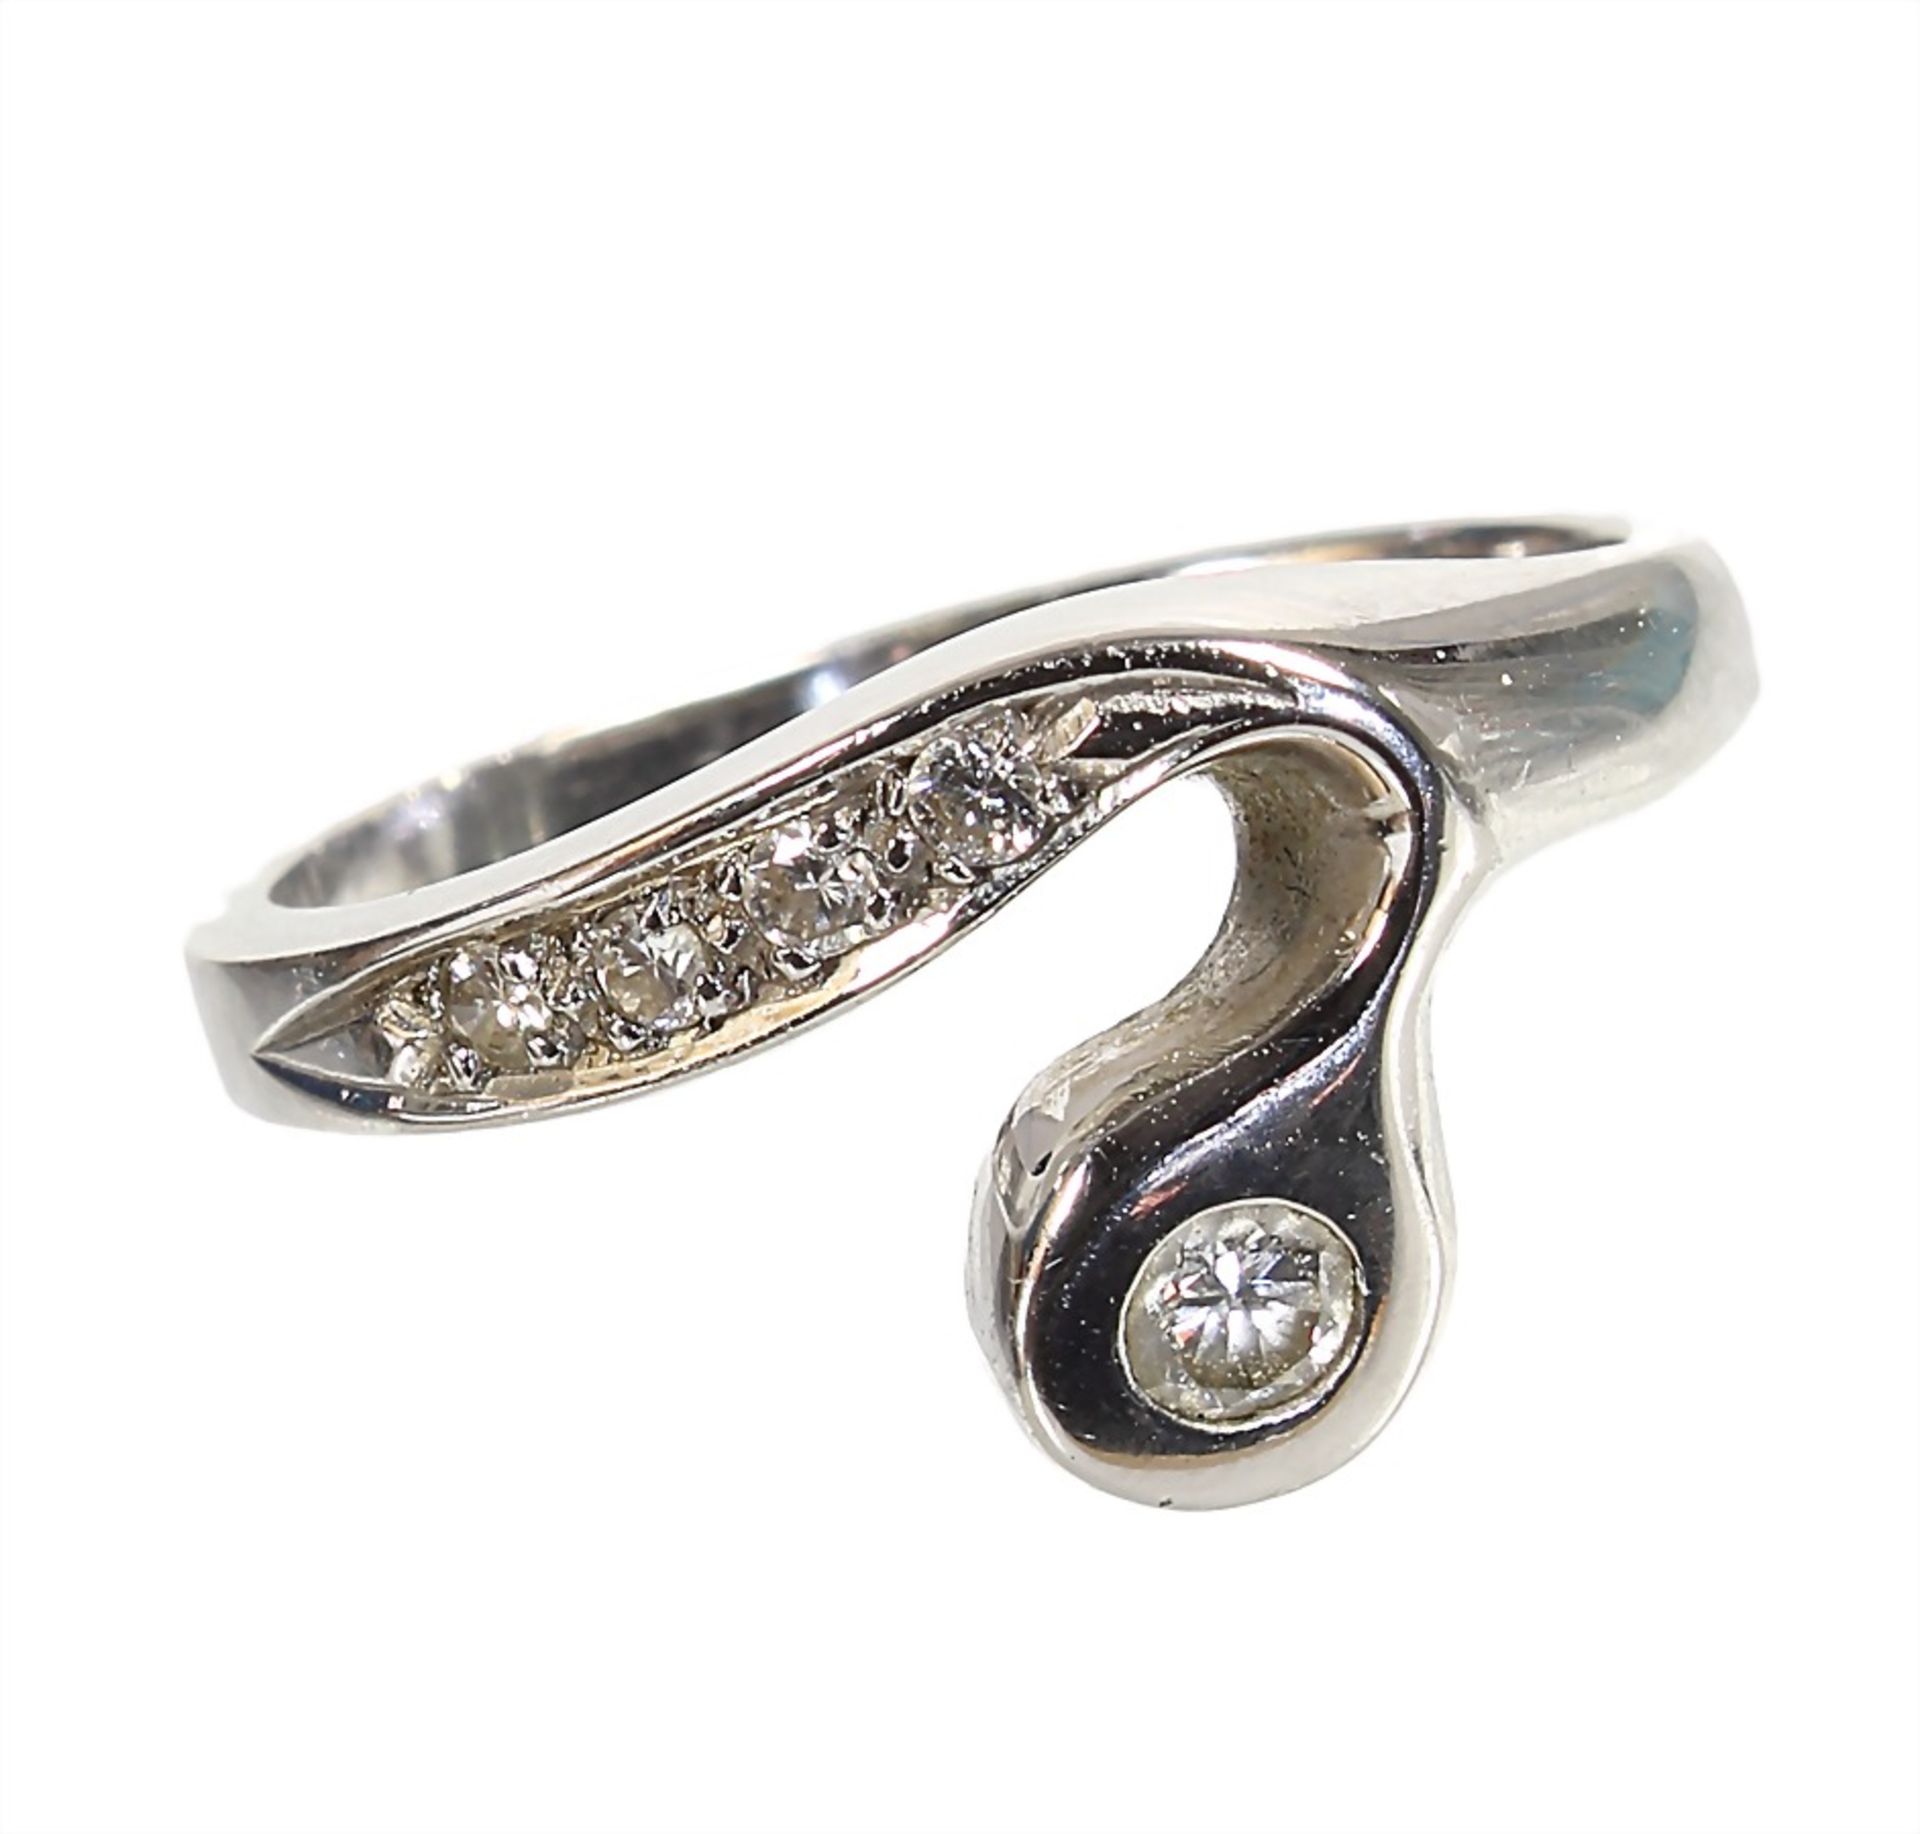 ring, white gold 585/000, signed: "CEDE", 5 brilliants c. 0.19 ct w-si, ring width c. 54